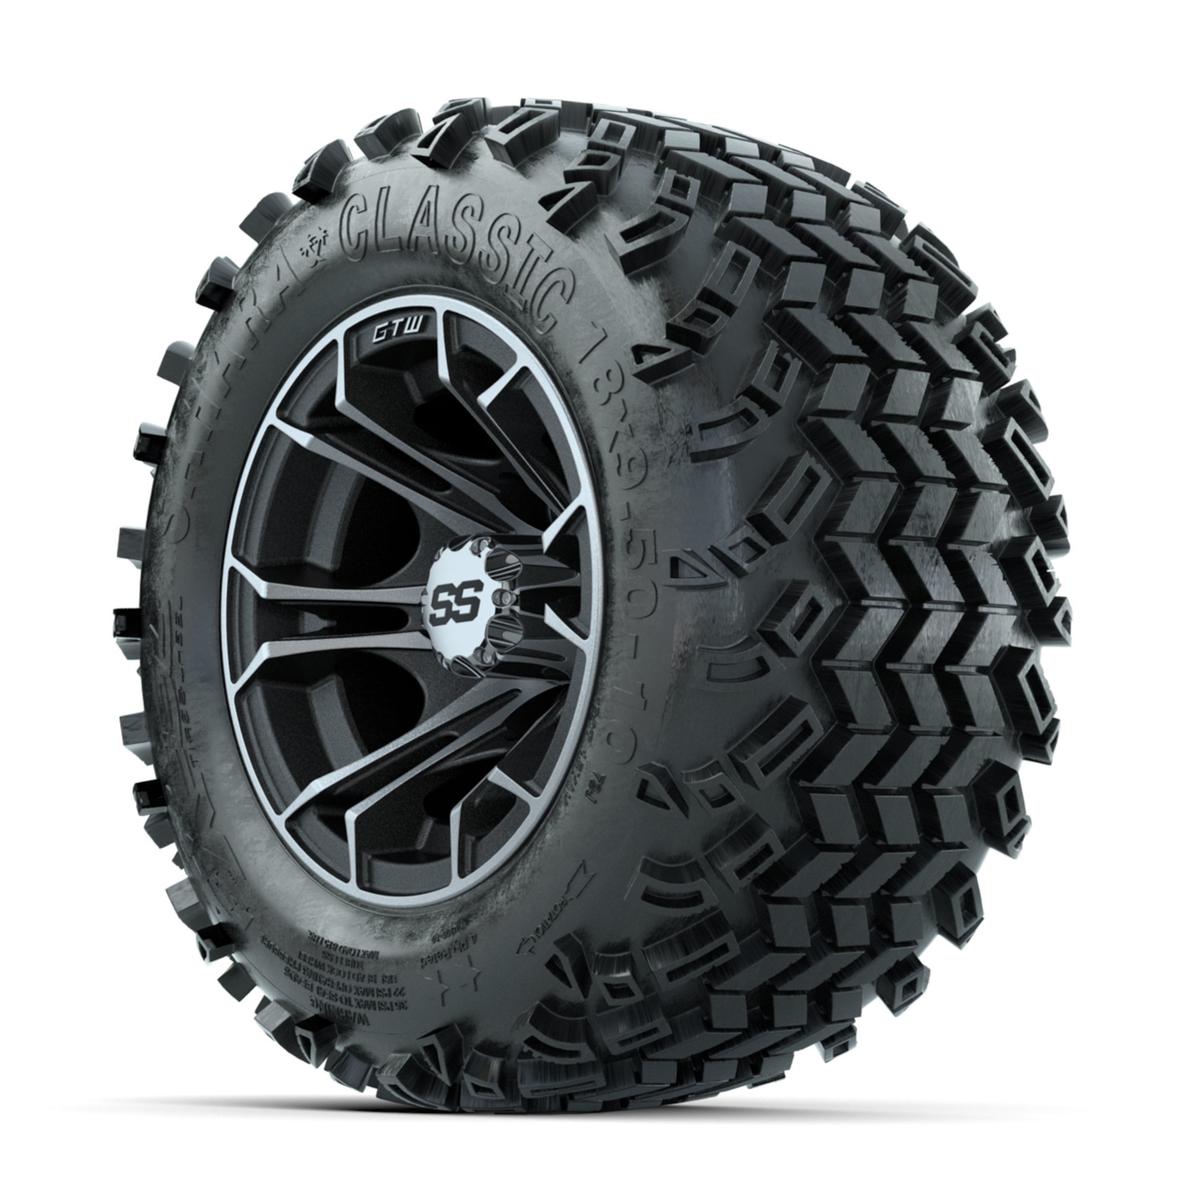 GTW Spyder Machined/Matte Grey 10 in Wheels with 18x9.50-10 Sahara Classic All Terrain Tires – Full Set